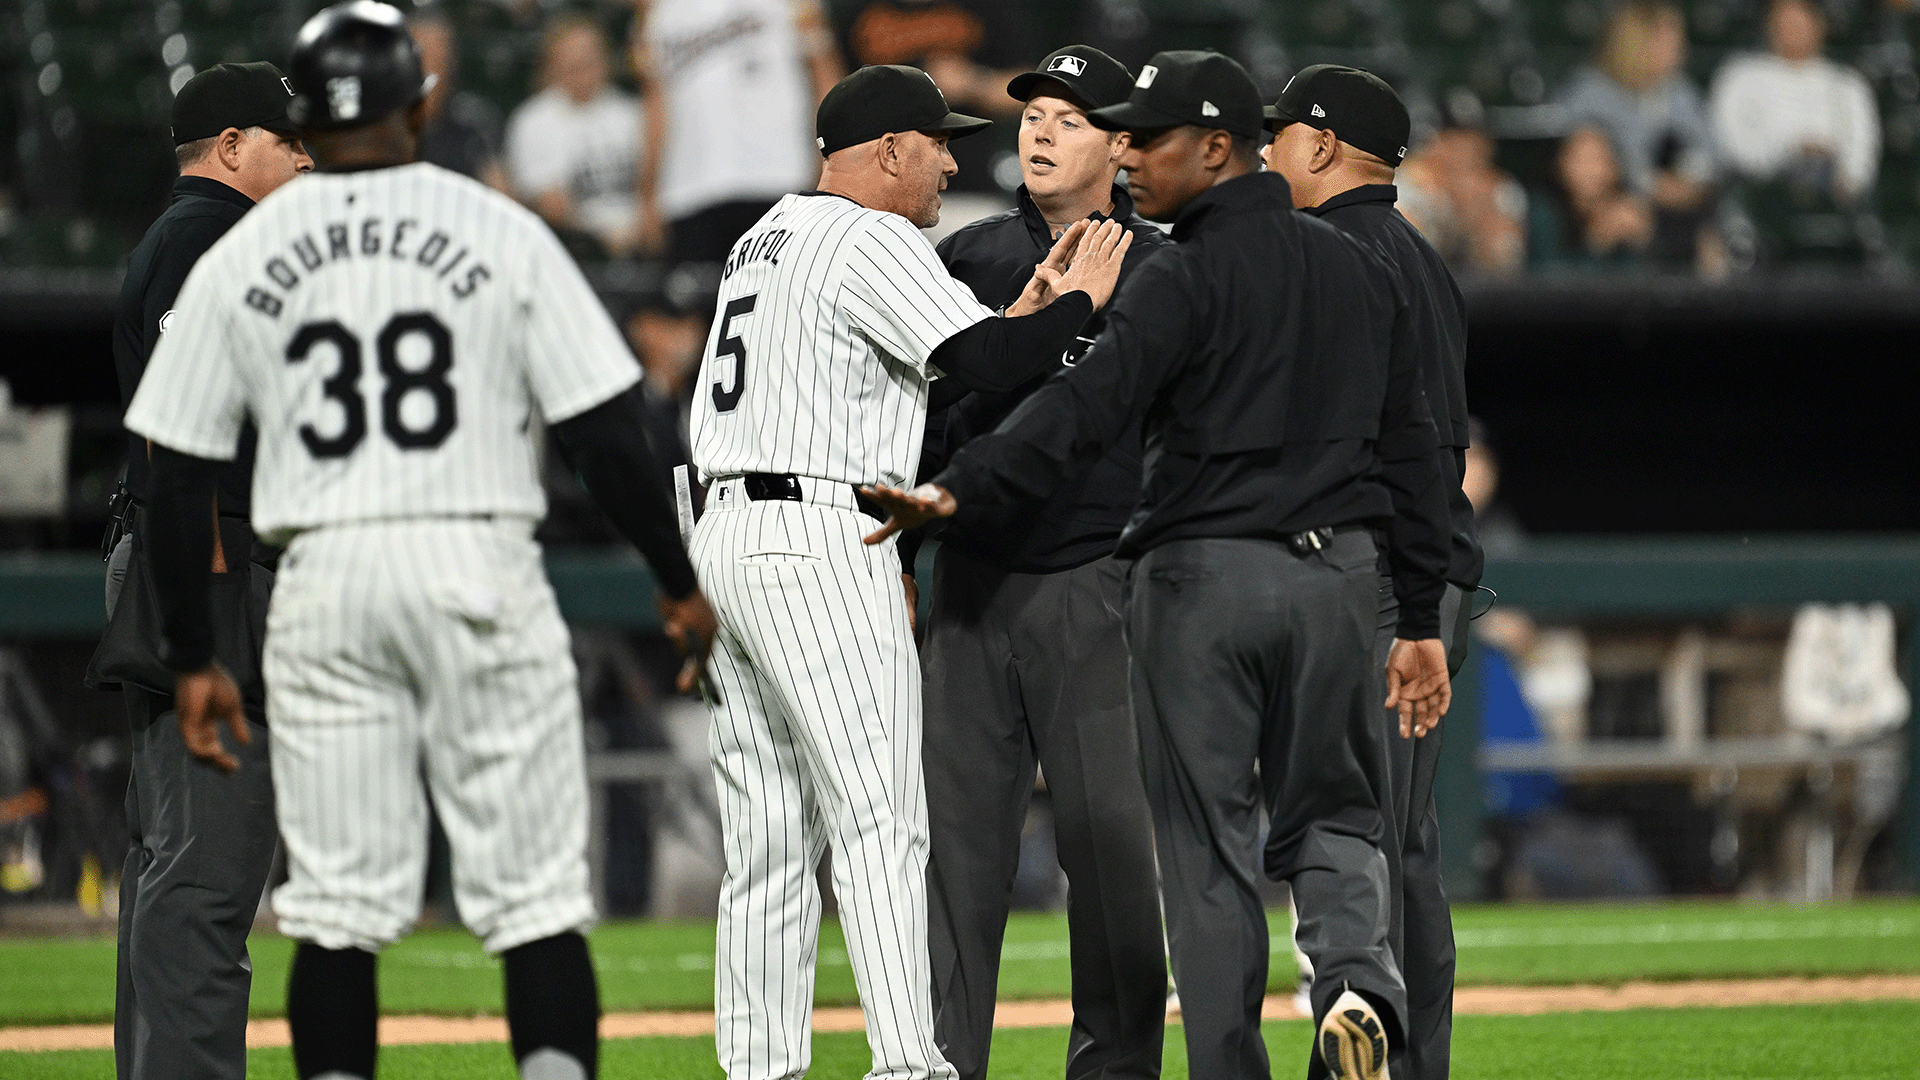 White Sox say MLB told them umps could have used discretion on interference call